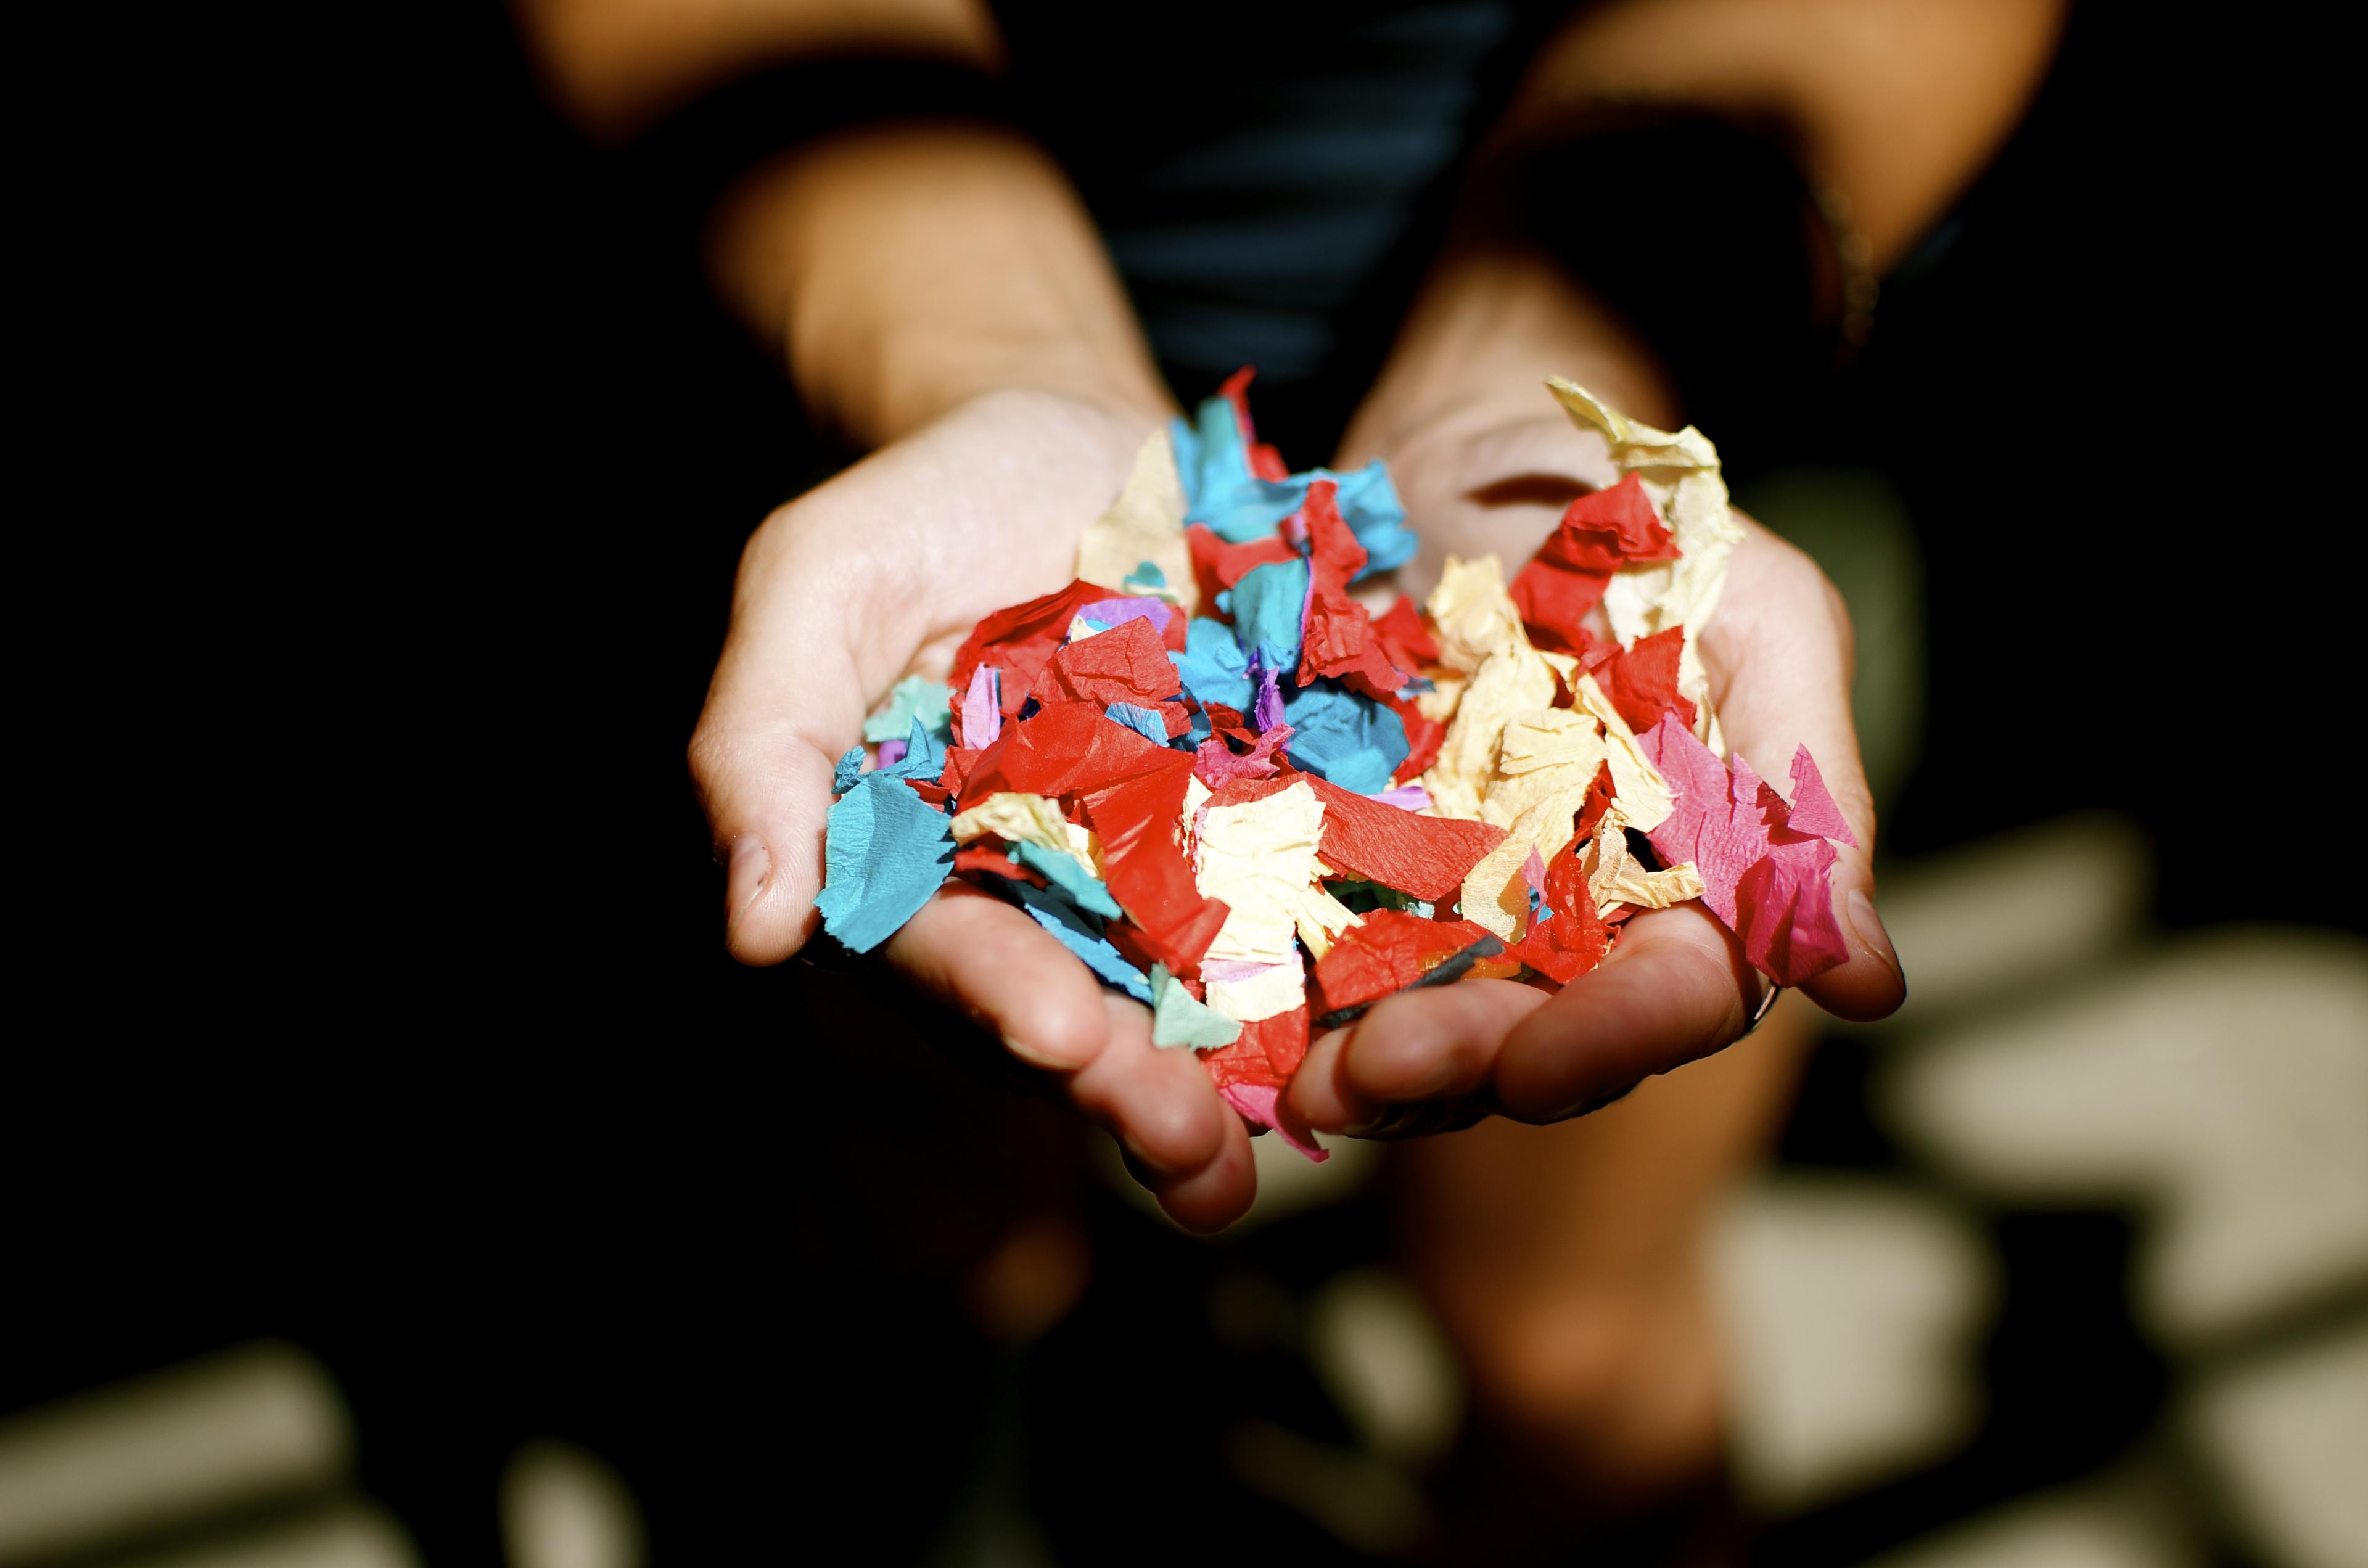 A person cups their hands to hold multi-colored confetti